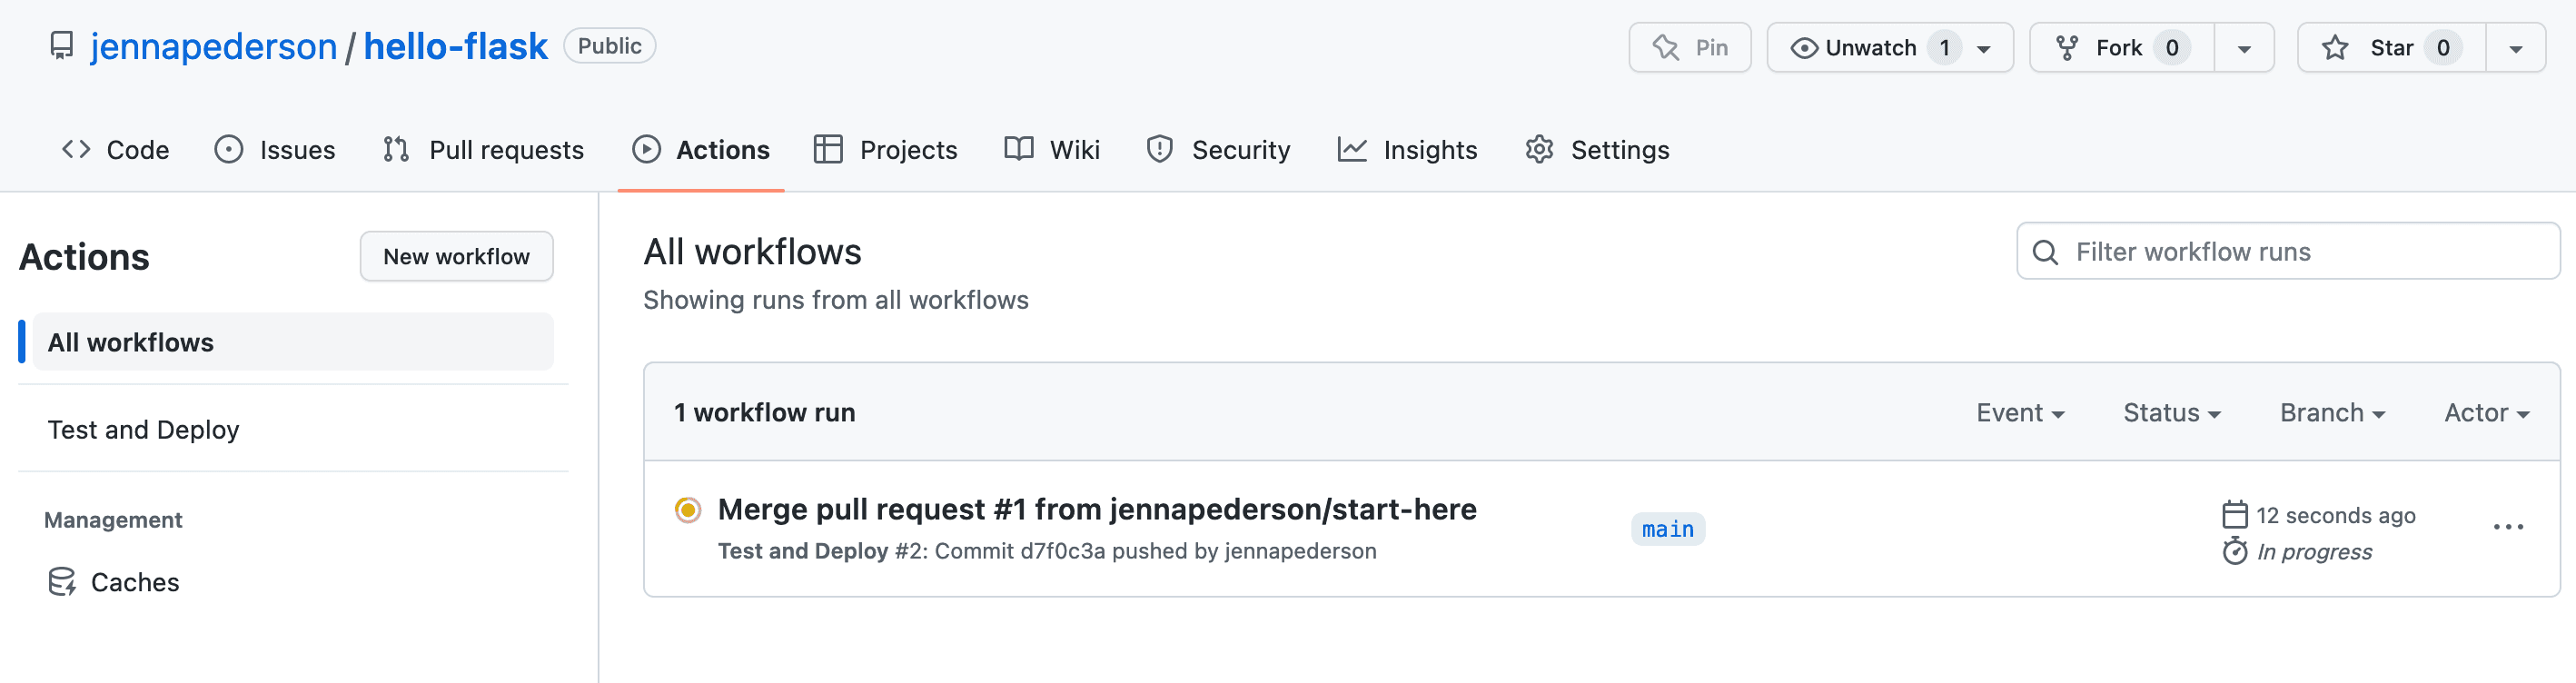 Shows the Actions tab of the  GitHub repo, where one workflow run has started